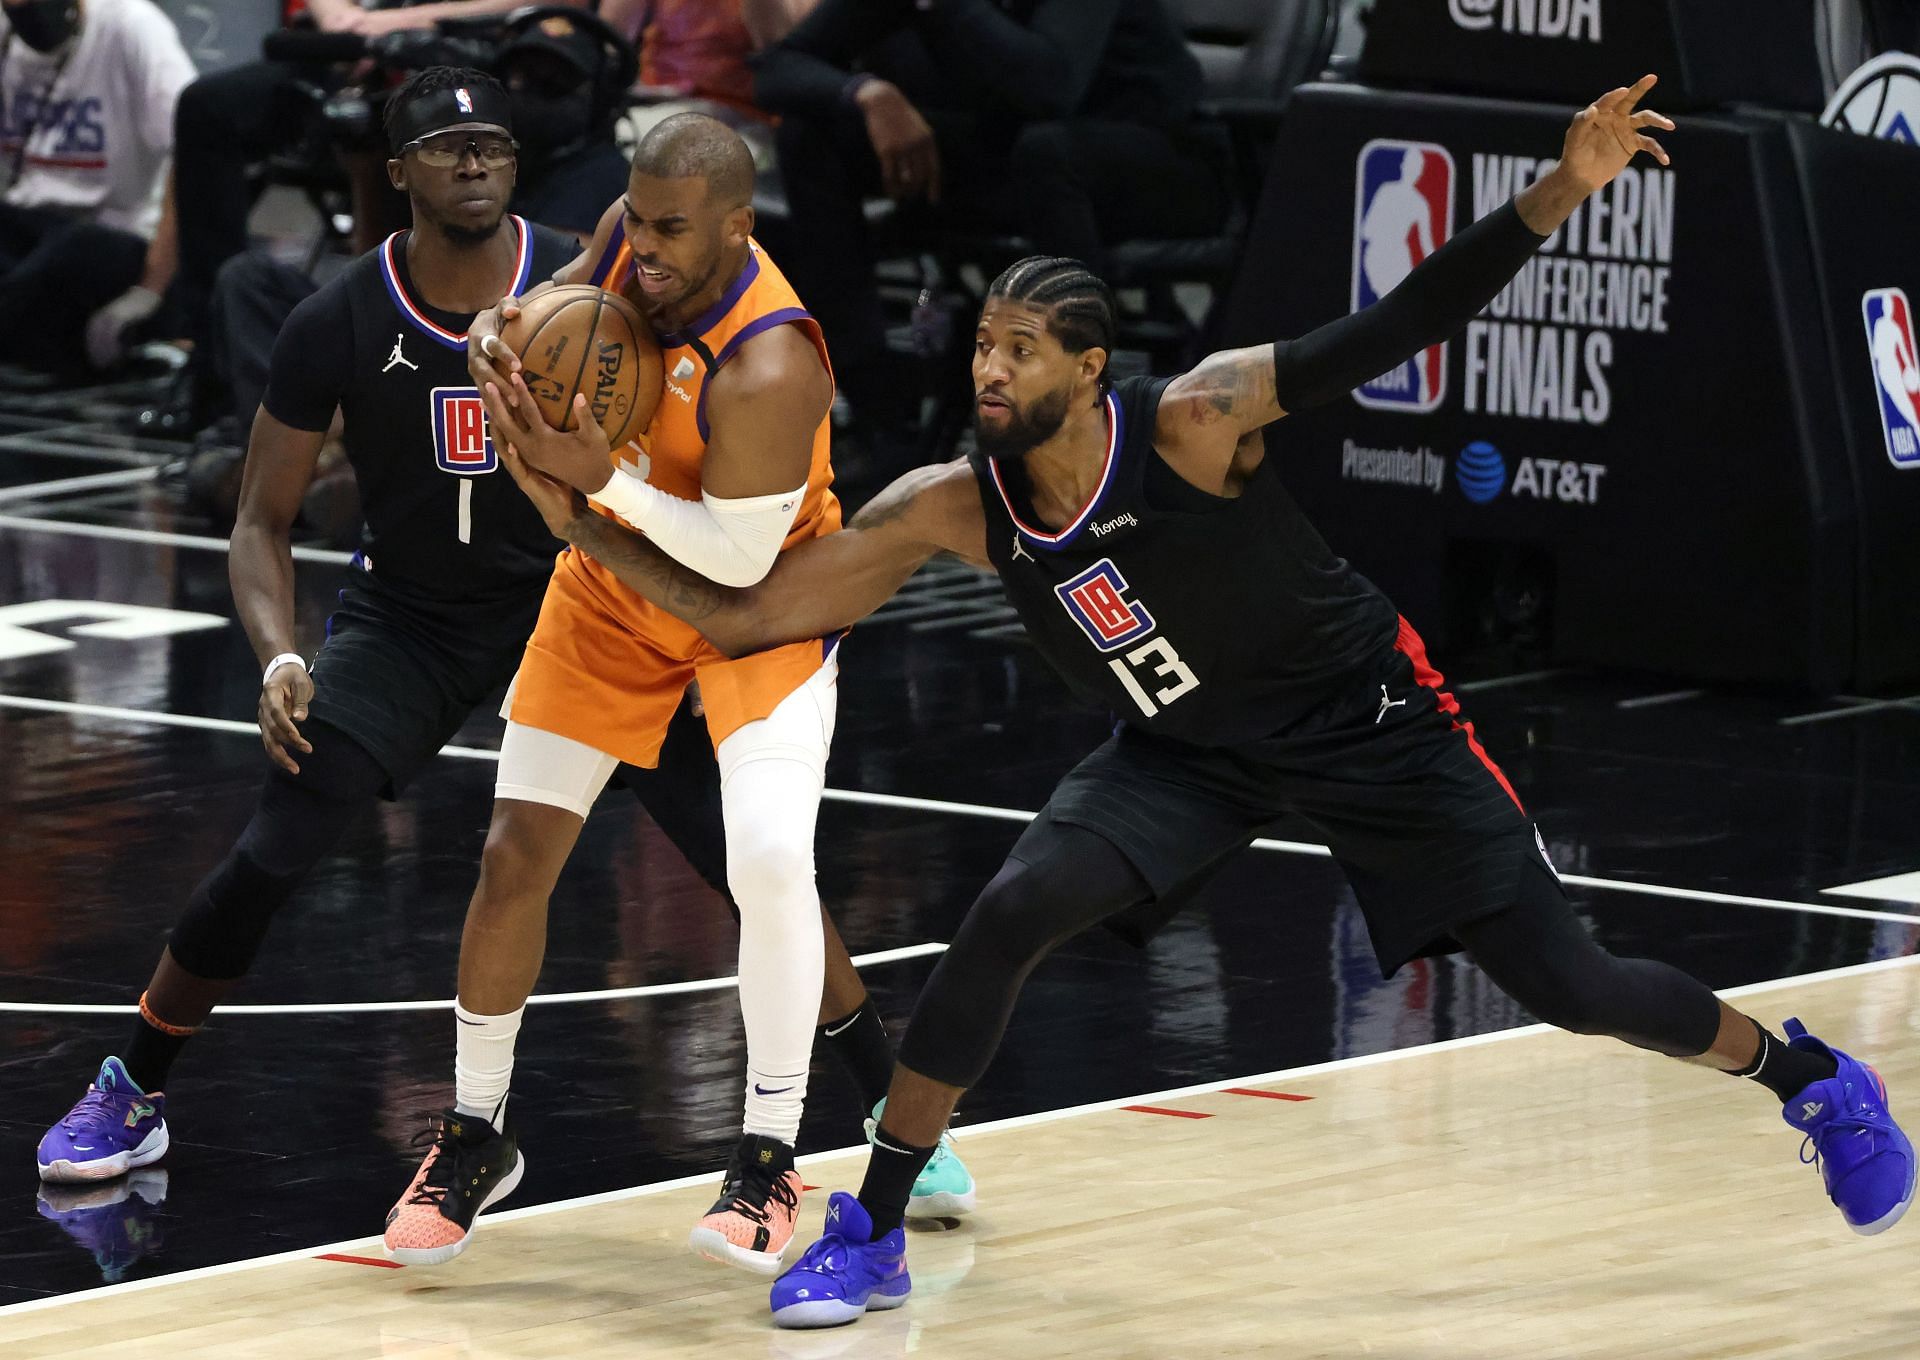 Chris Paul of the Phoenix Suns protects the ball against Reggie Jackson and Paul George of the LA Clippers